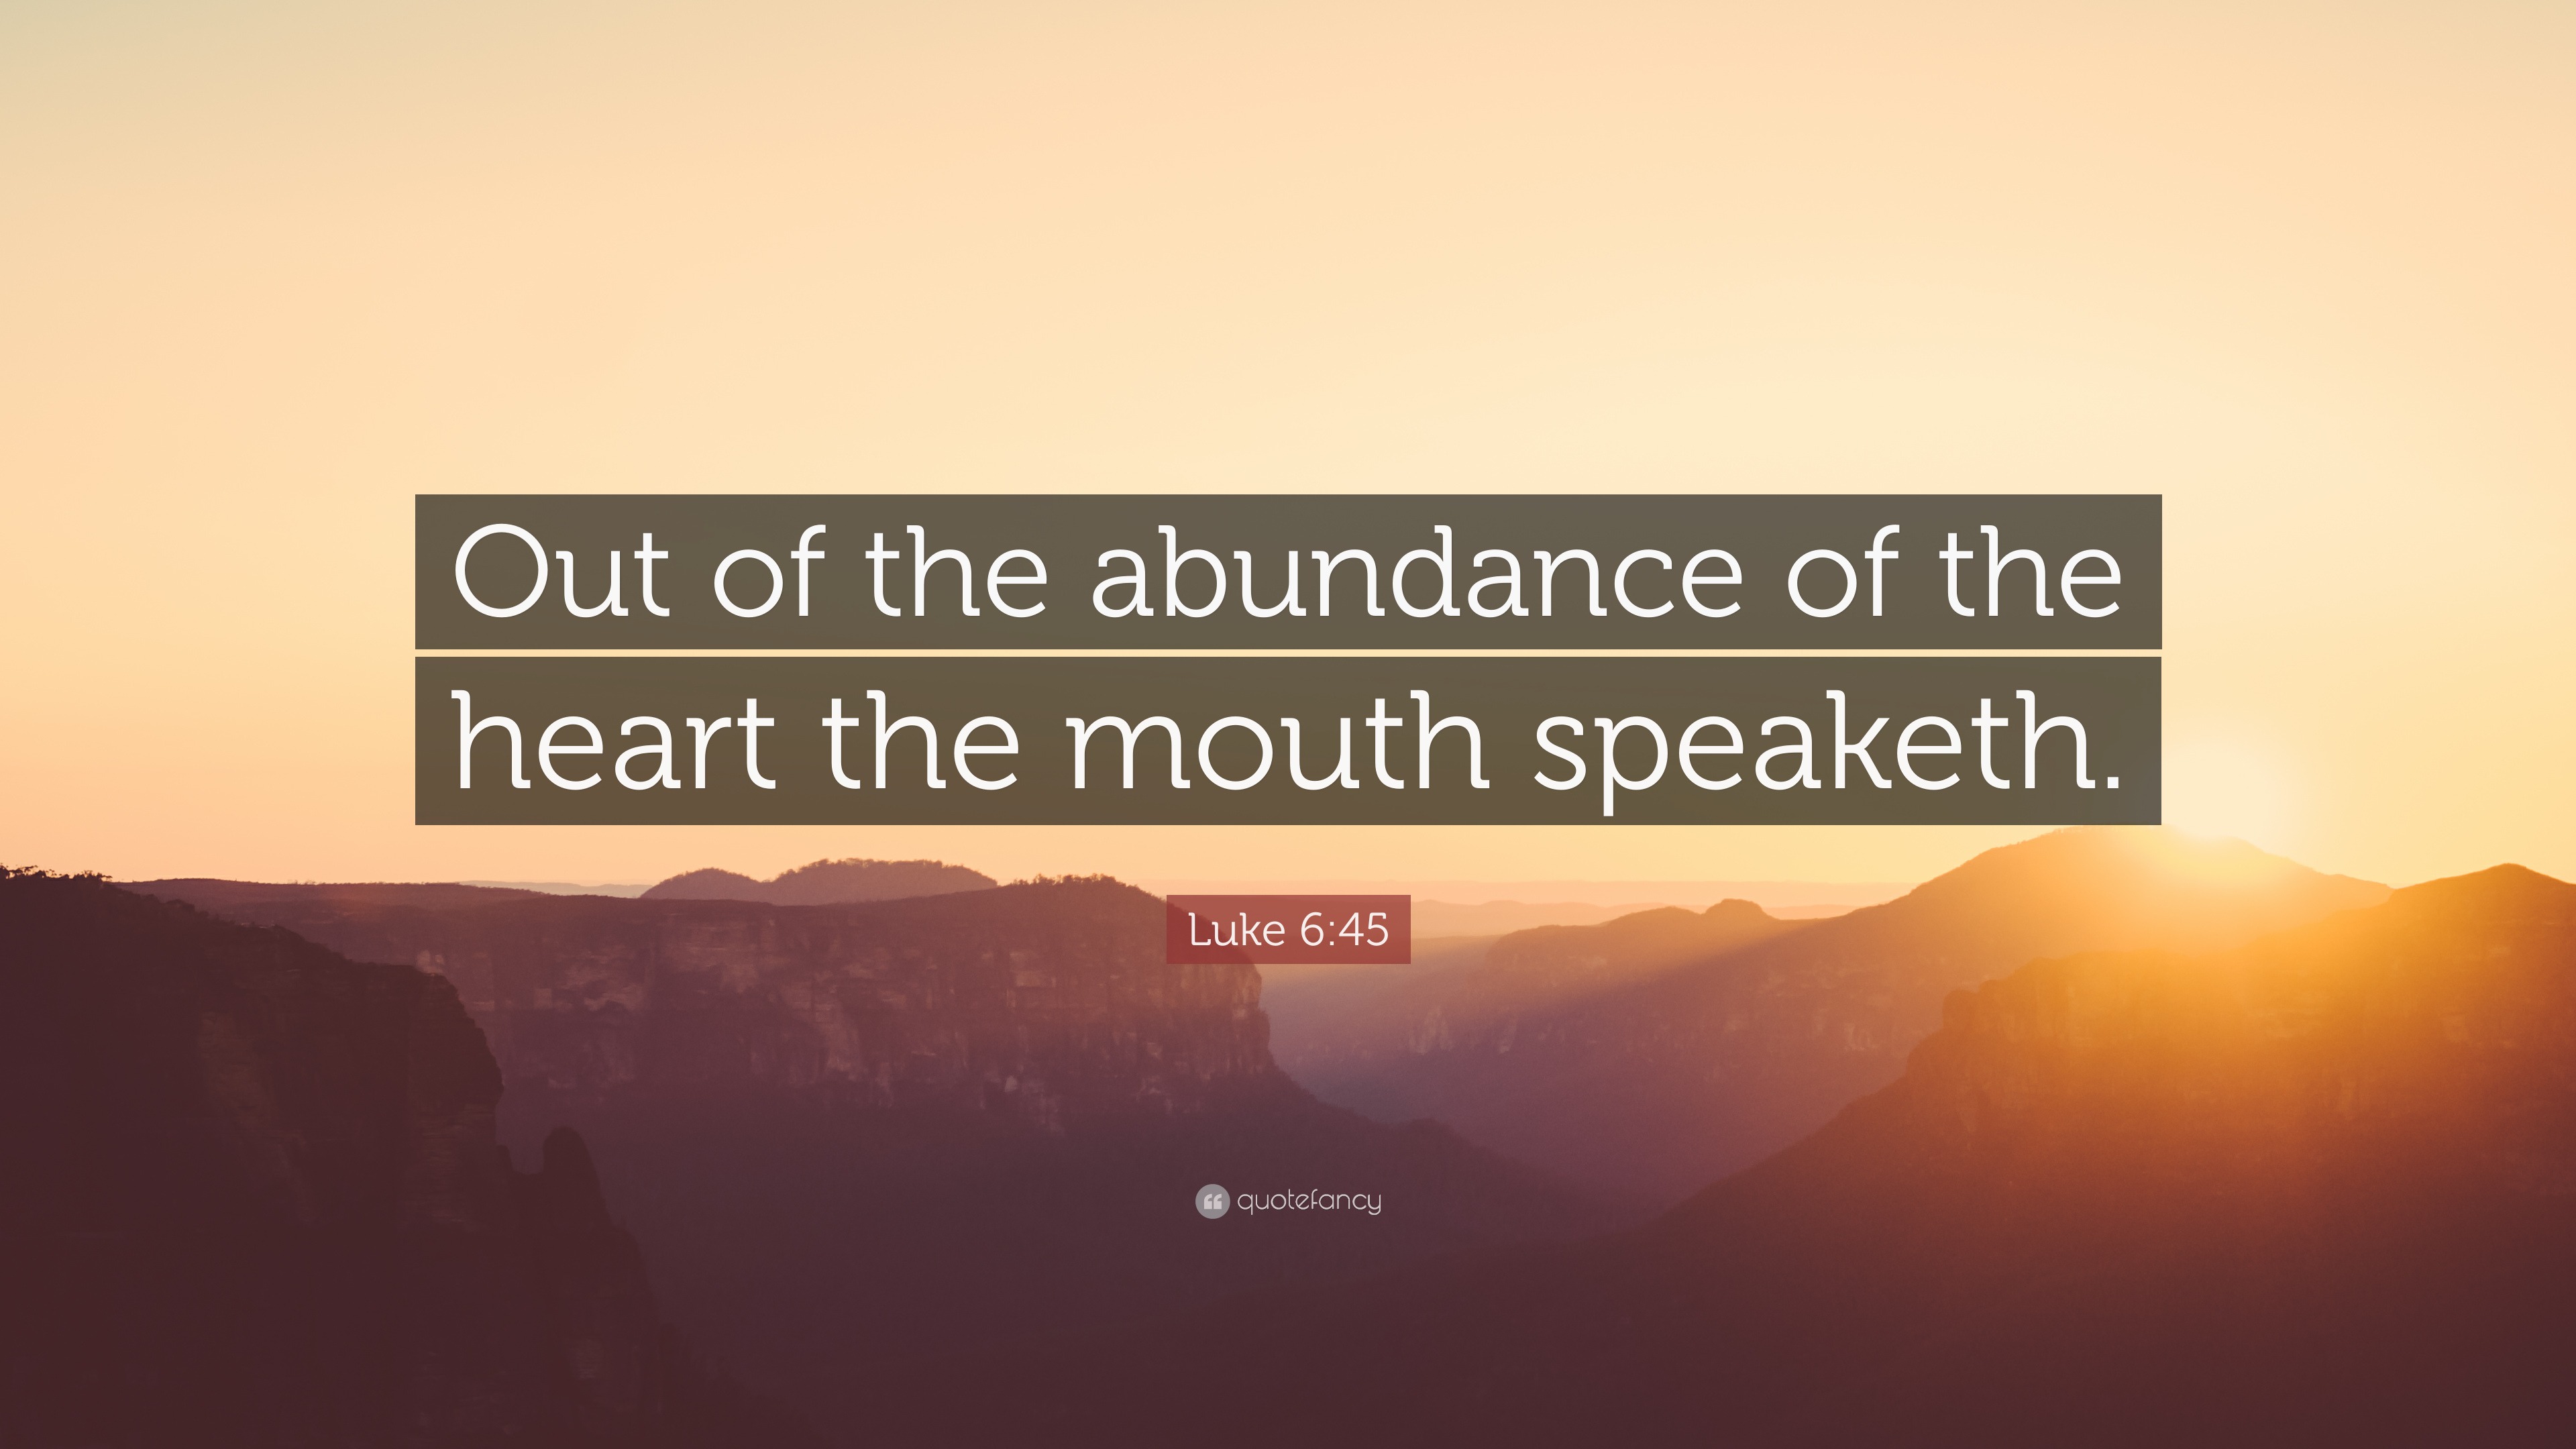 out of the overflow of the heart the mouth speaks verse